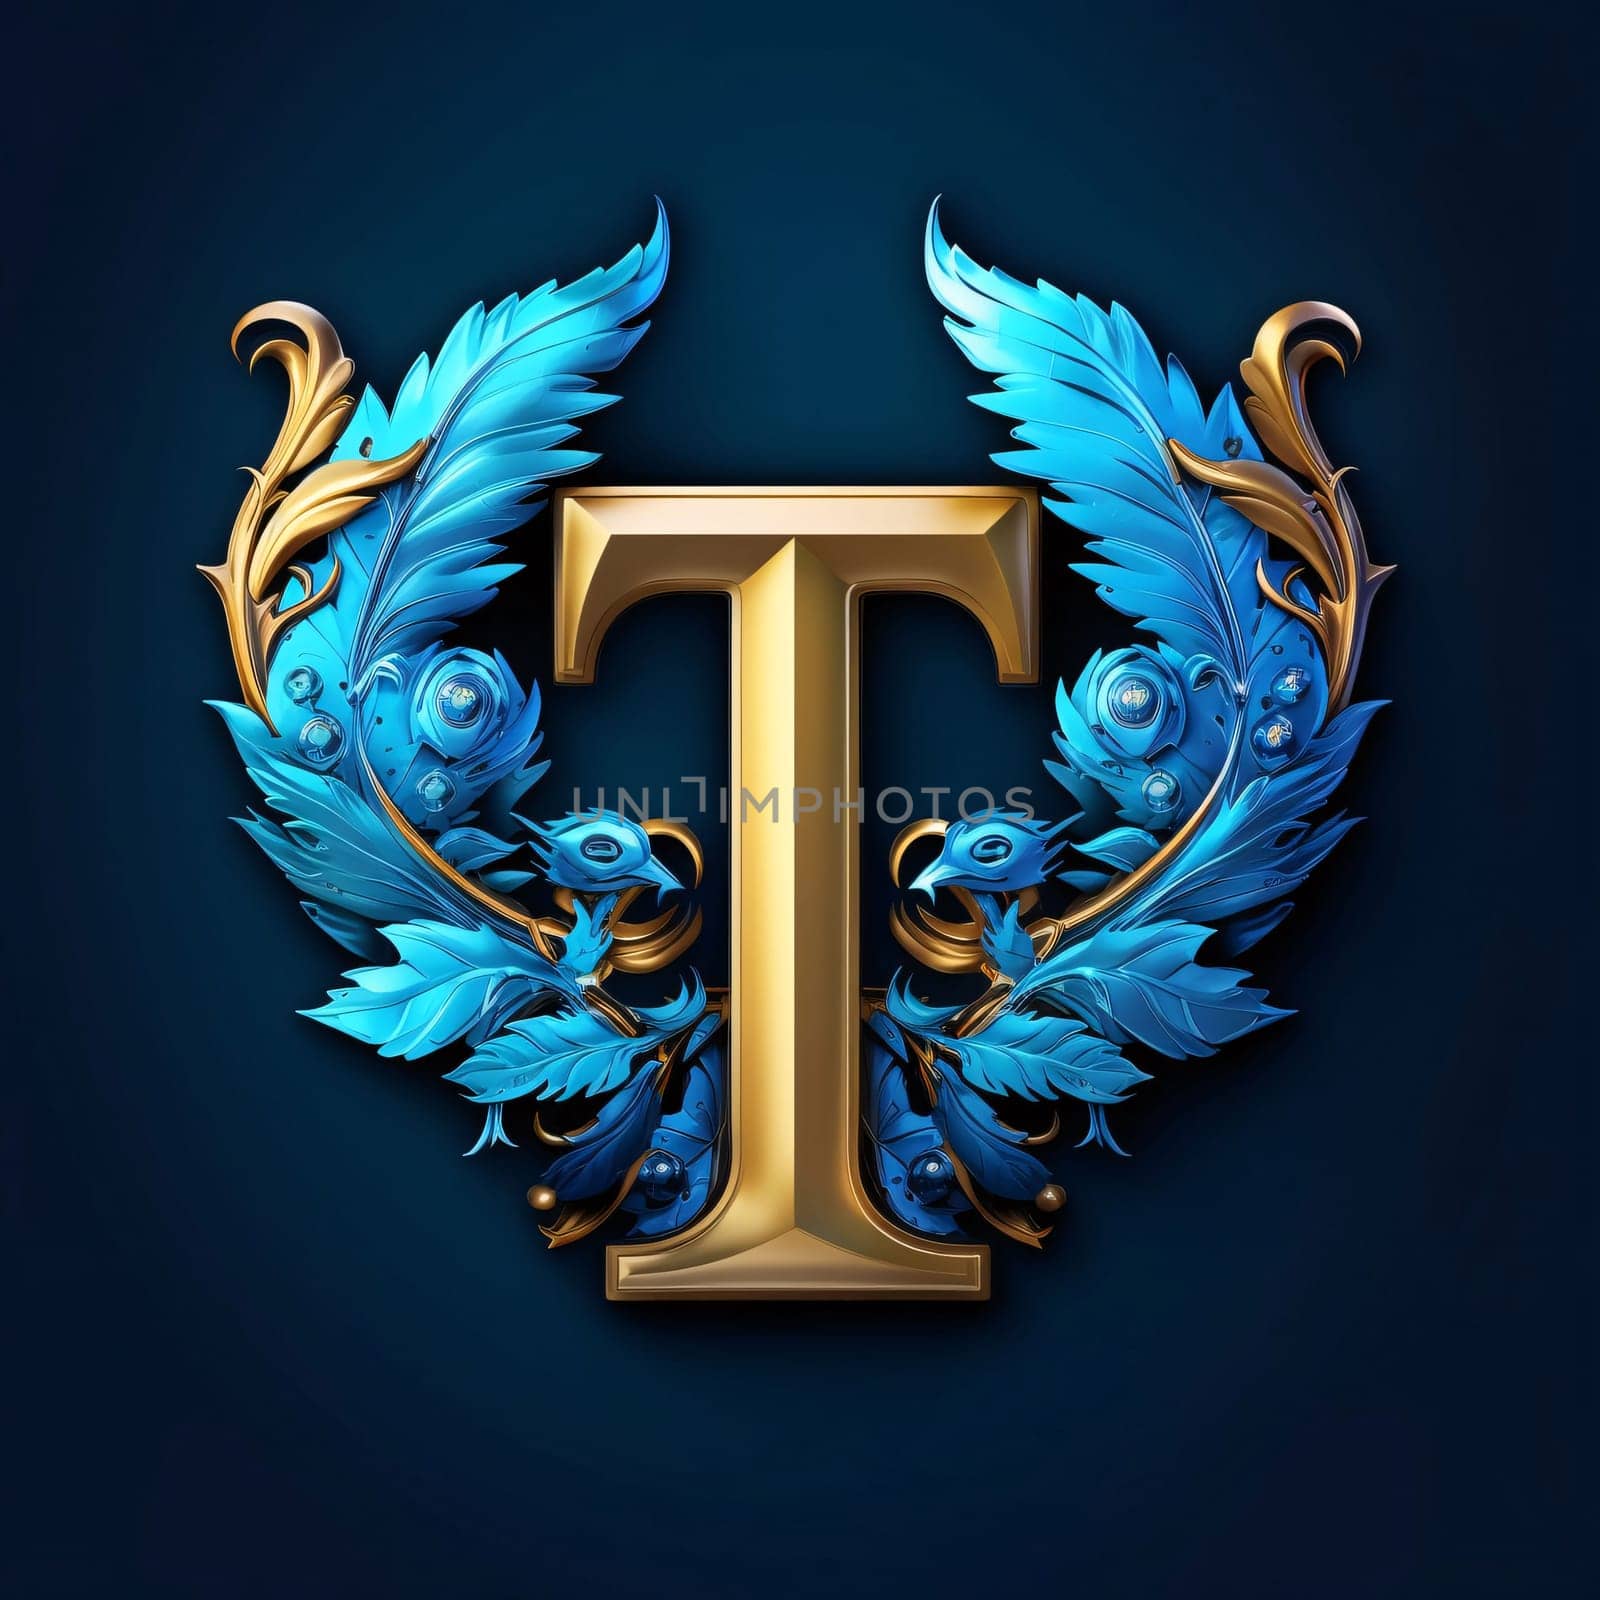 Graphic alphabet letters: ornate letter T with golden laurel wreath on blue background